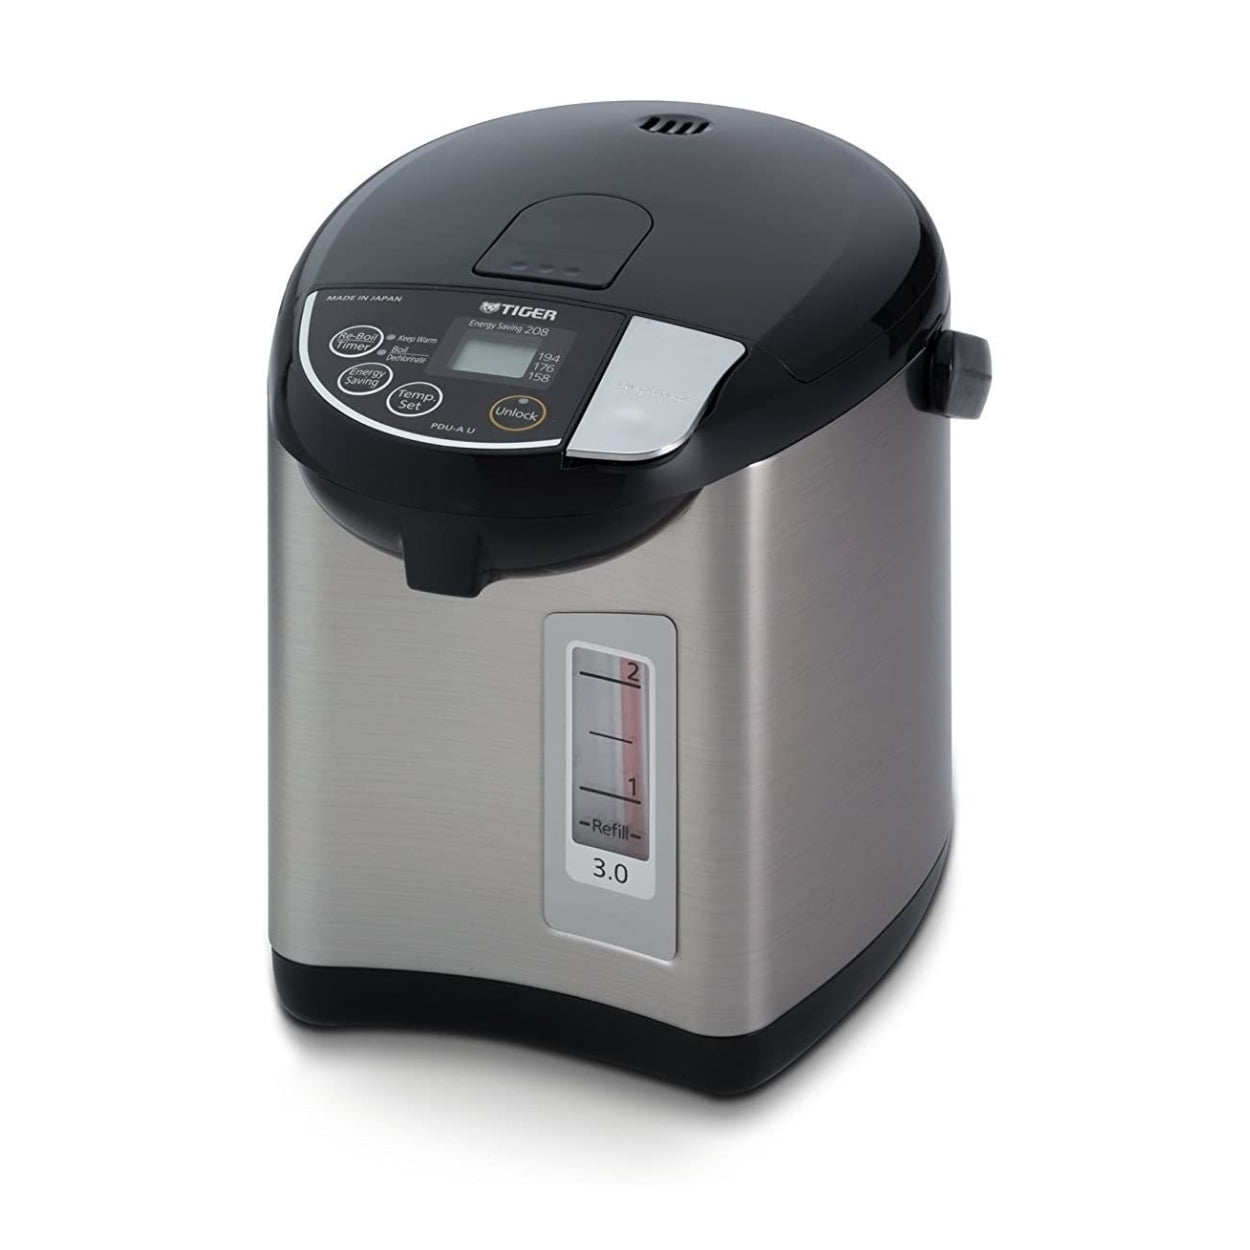 Zojirushi Cd-whc40xh Micom Water Boiler and Warmer 135 Oz Stainless Gray for sale online